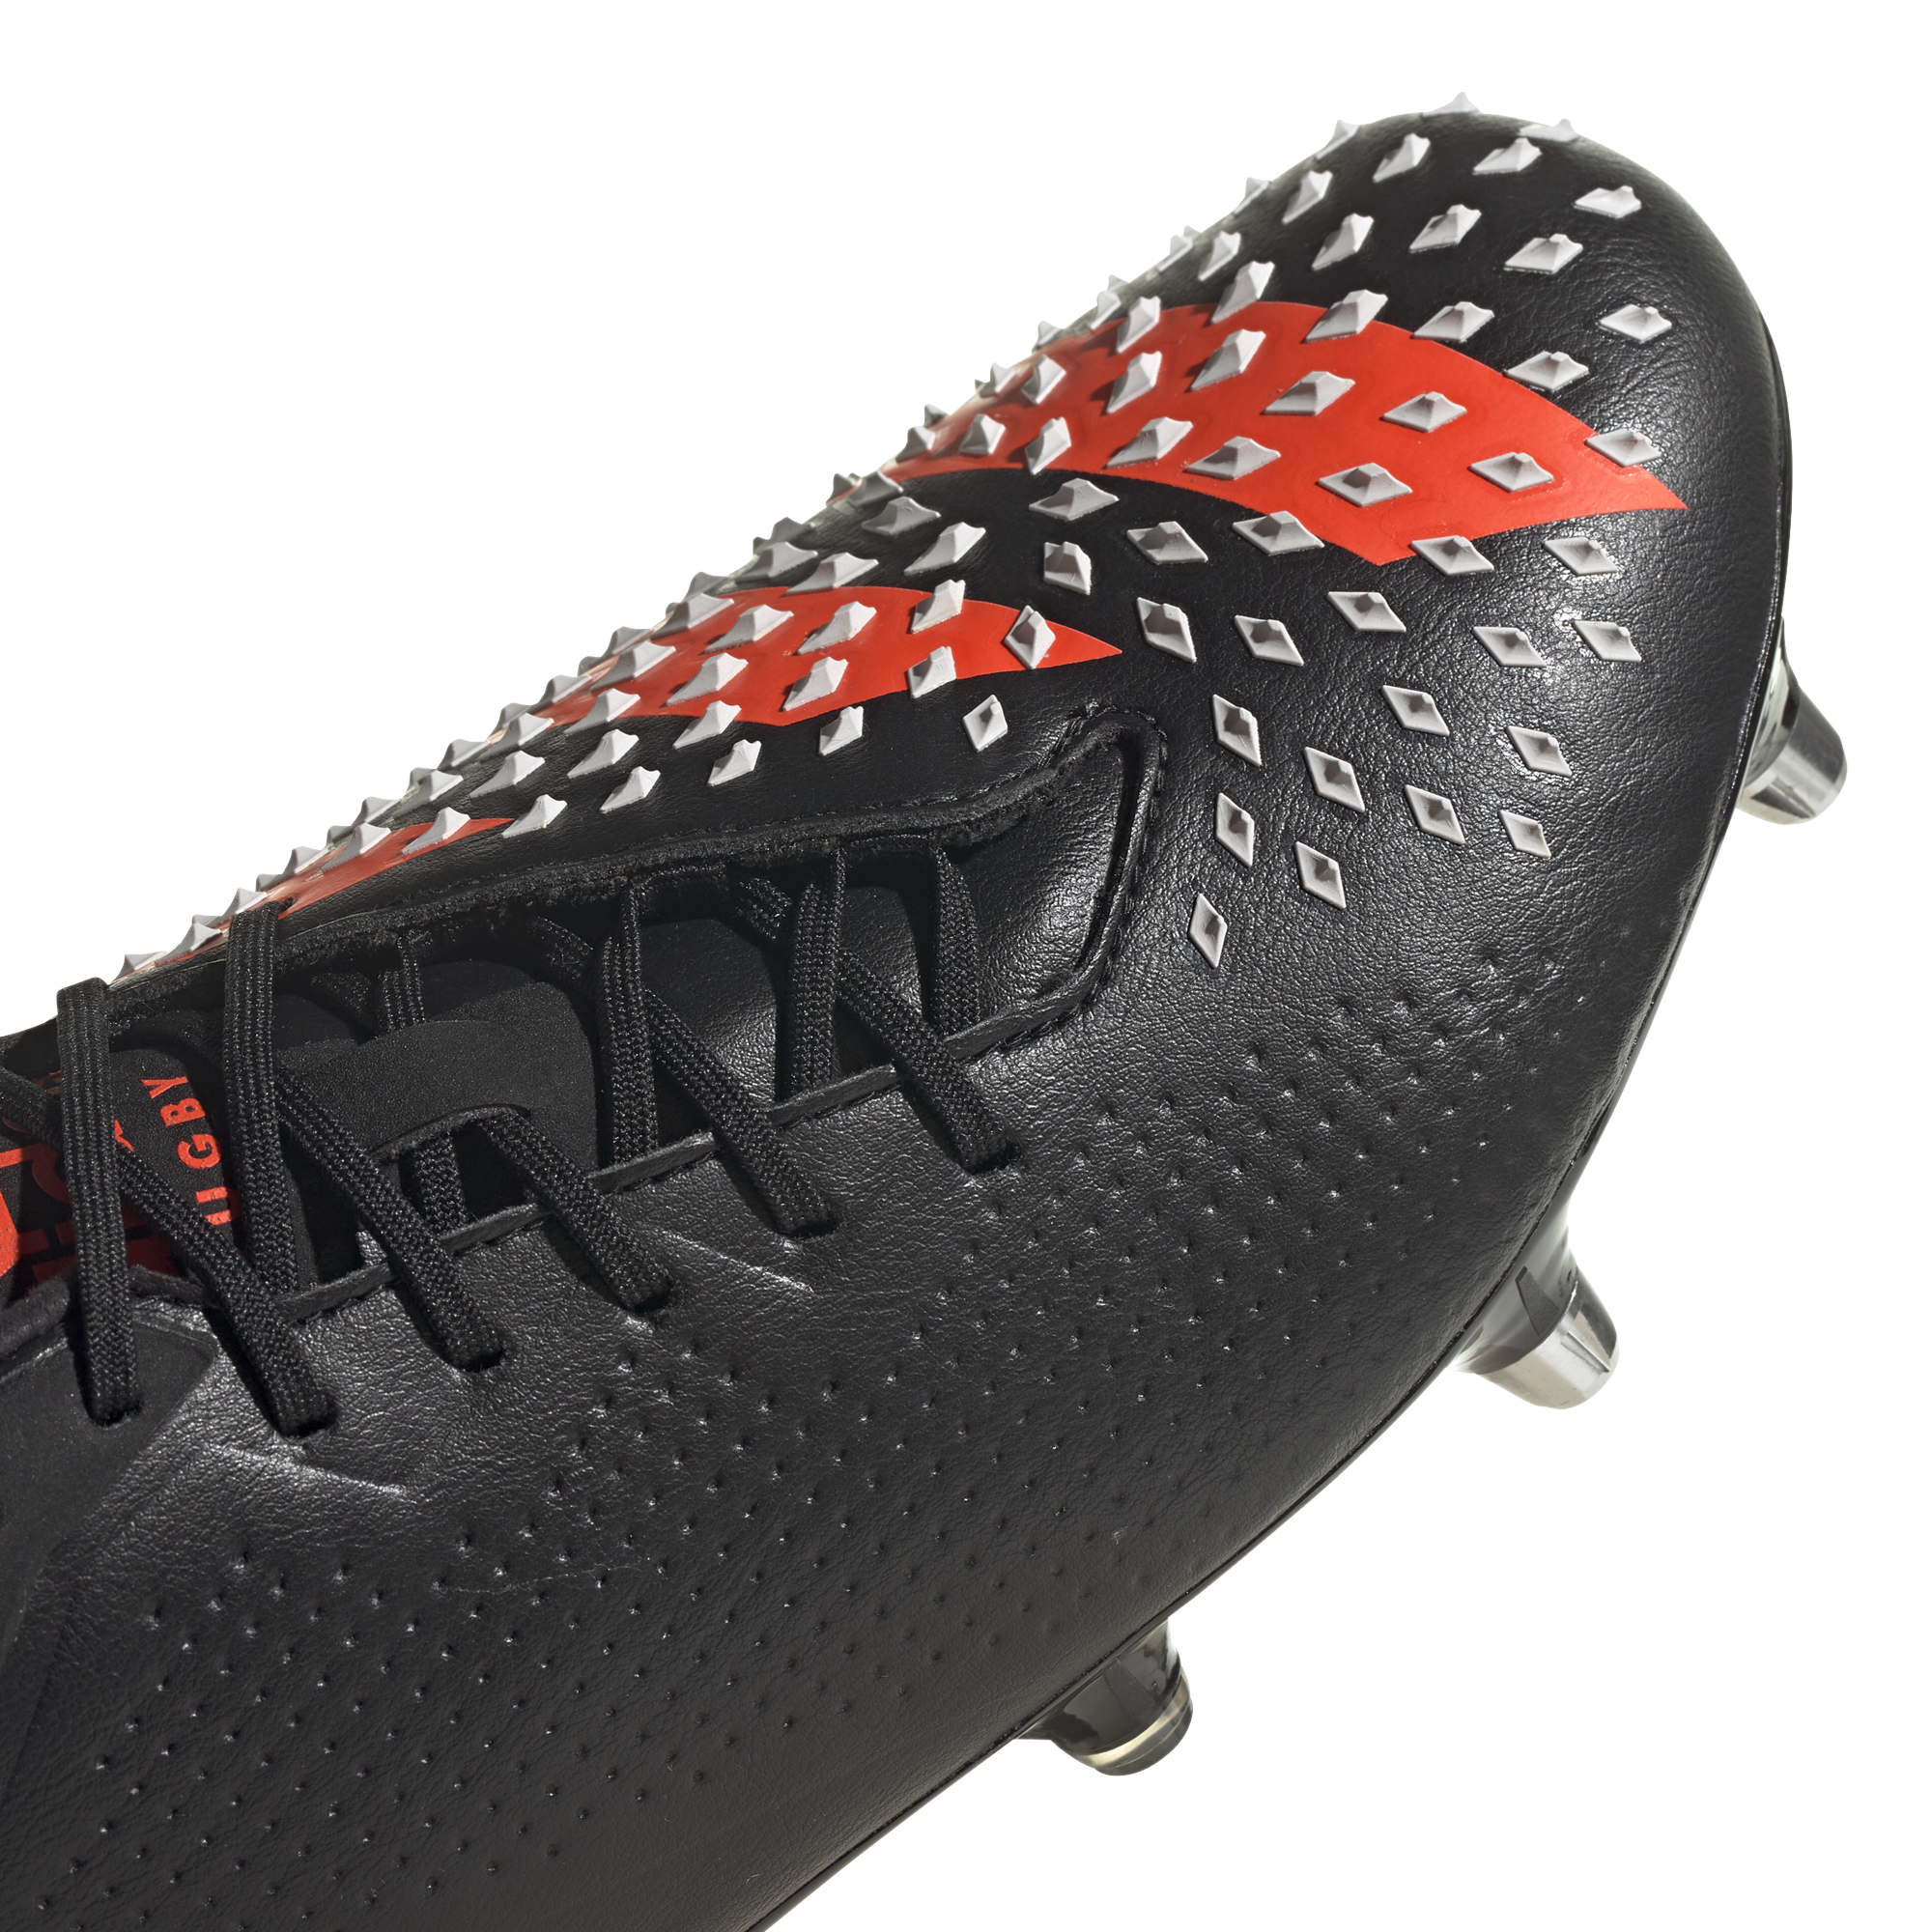 Adidas Malice SG Boots Black | Rugby Now